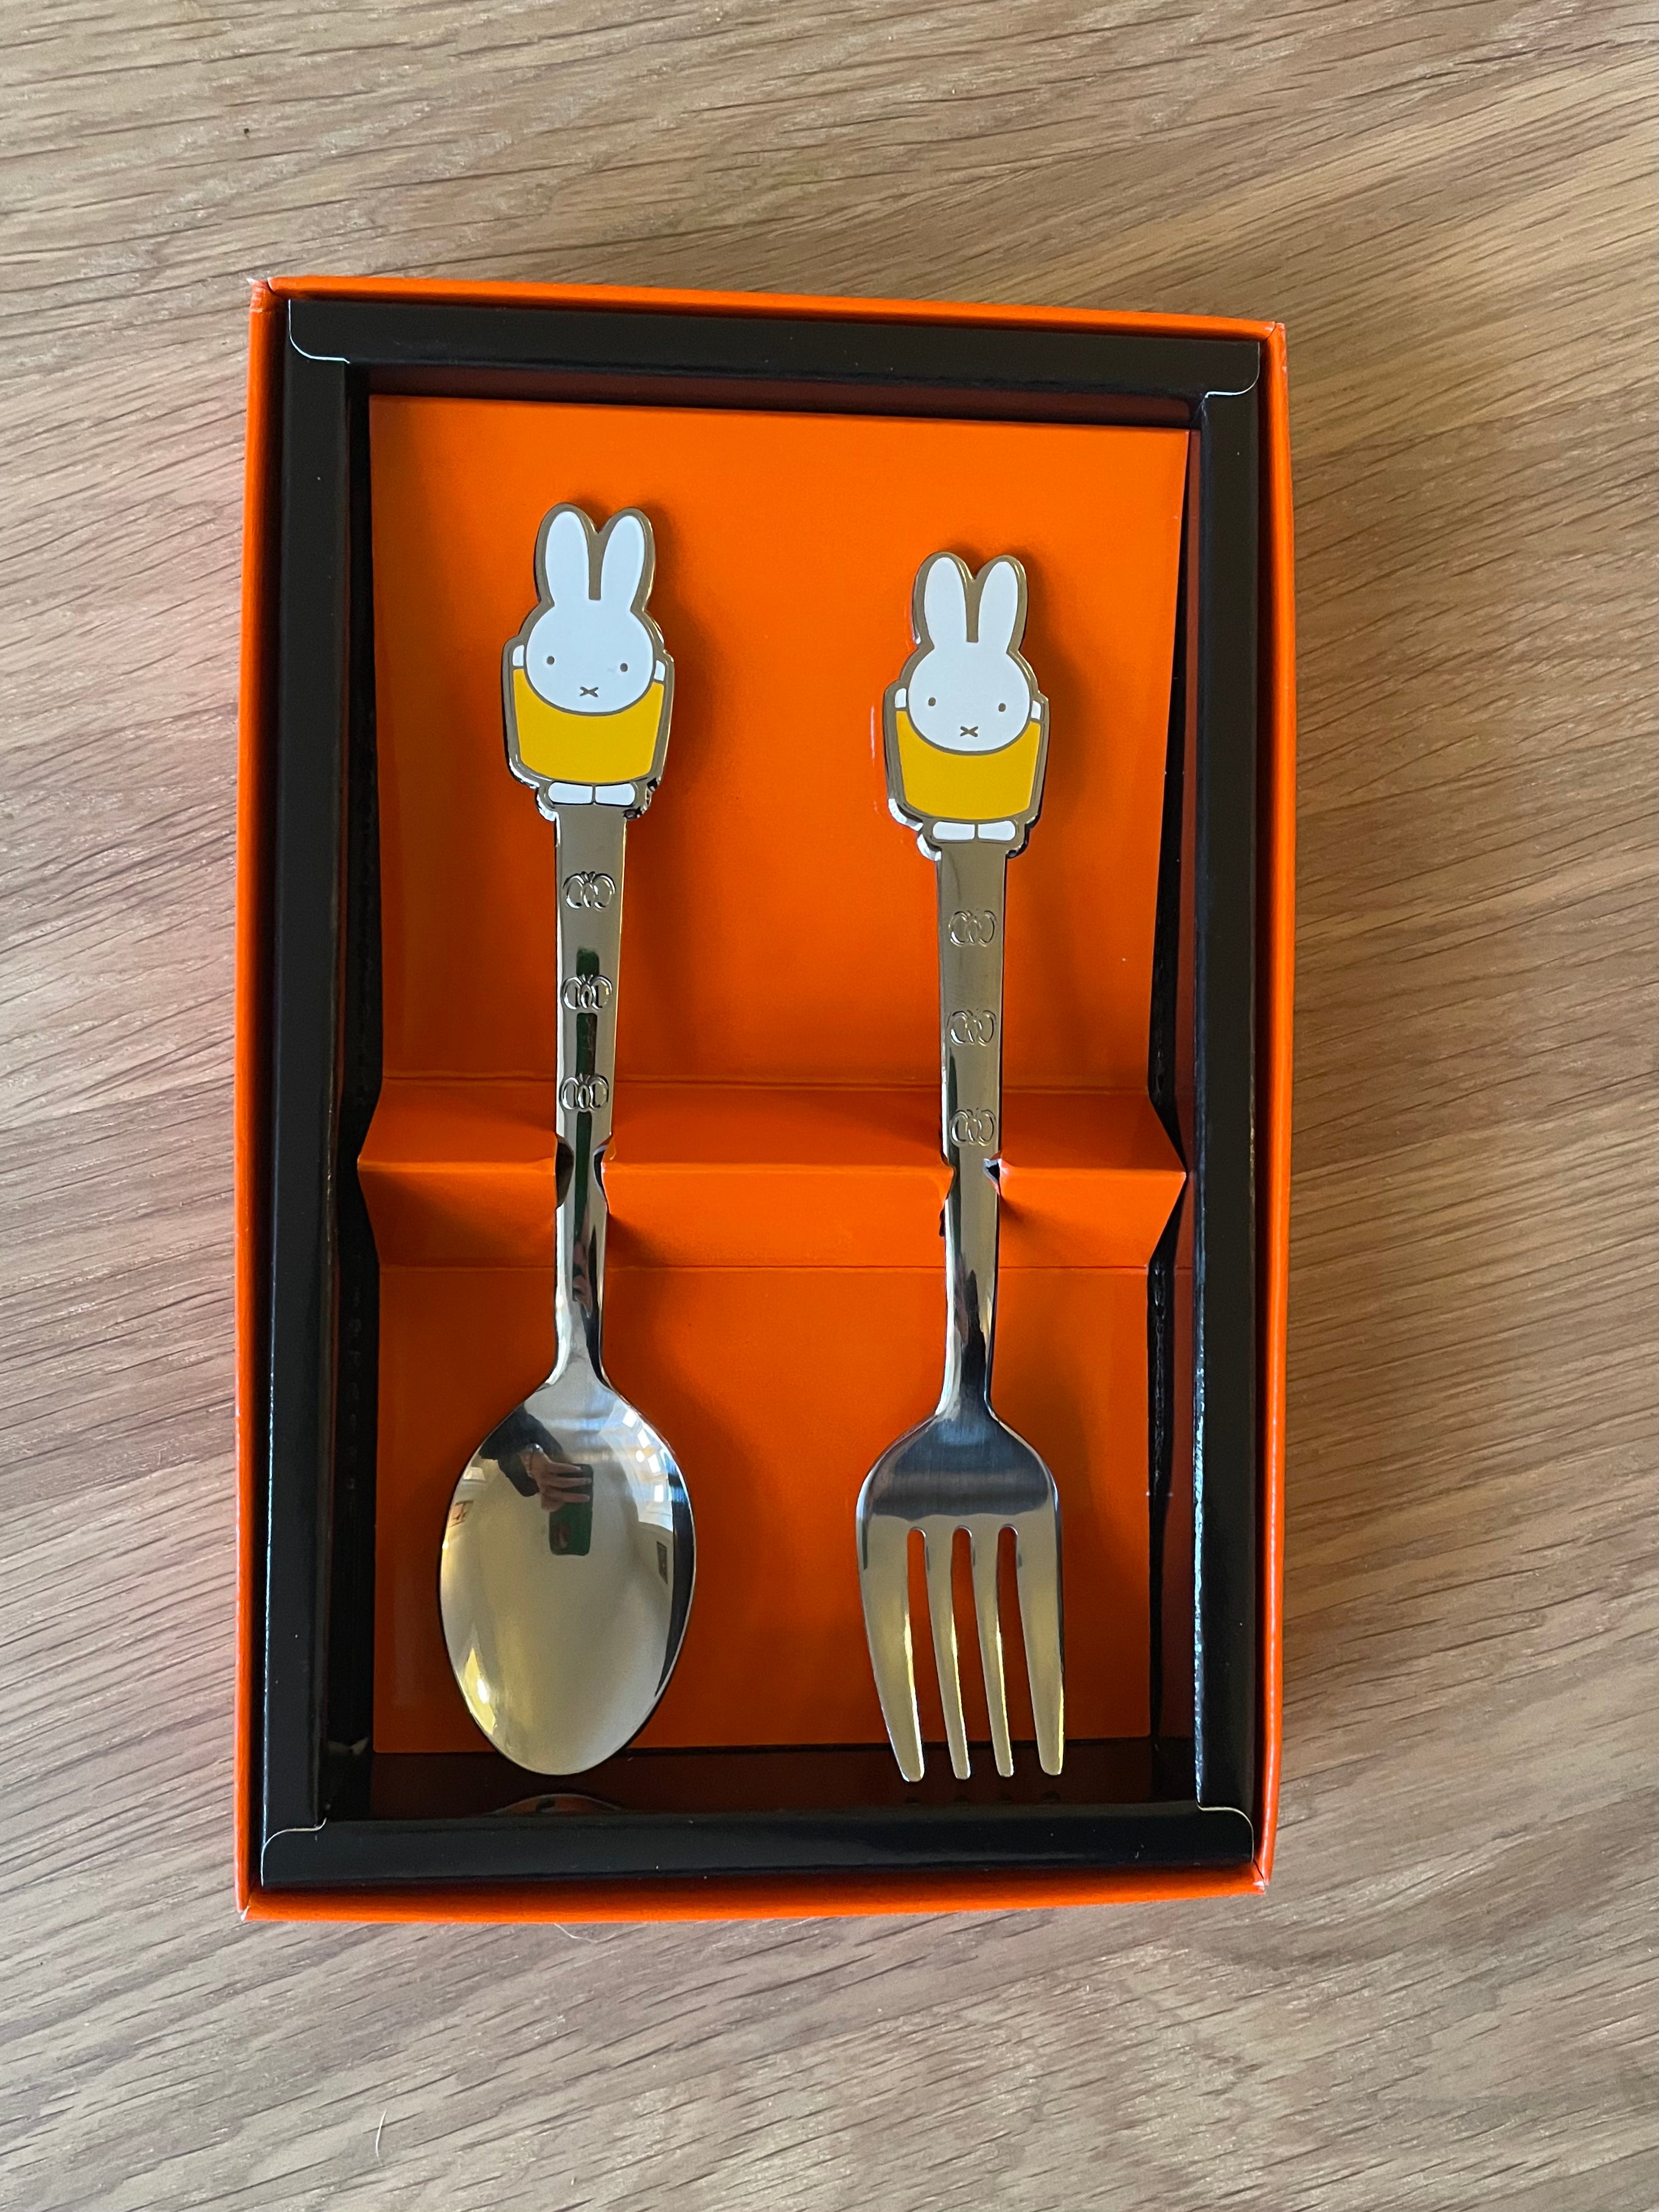 Miffy children's cutlery: spoon and fork